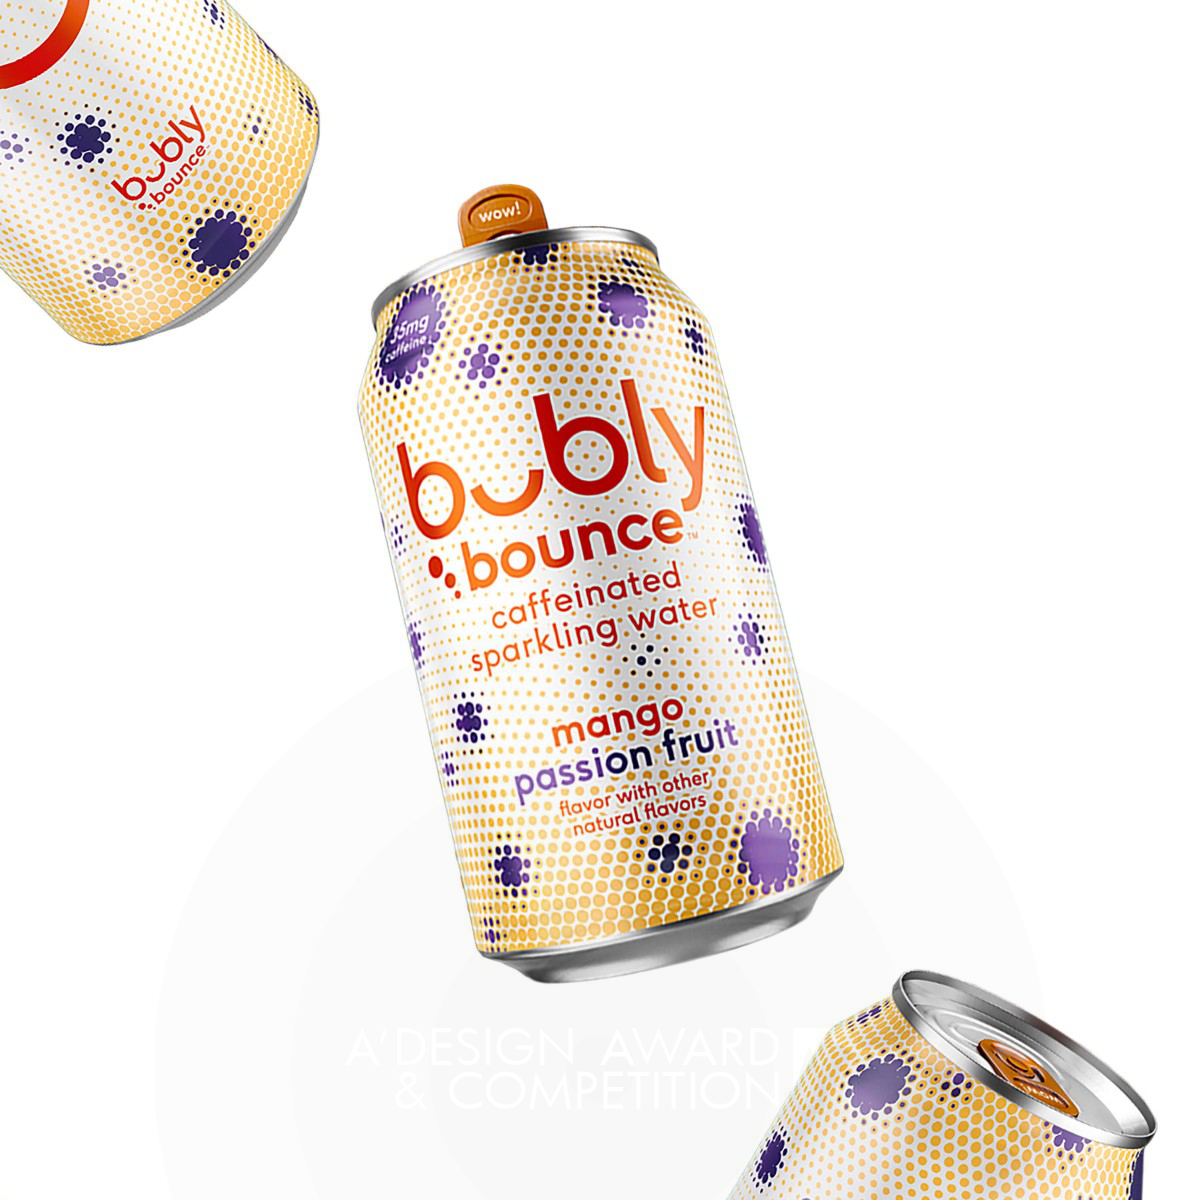 PepsiCo Design and Innovation wins Iron at the prestigious A' Packaging Design Award with Bubly Bounce Beverage Packaging.